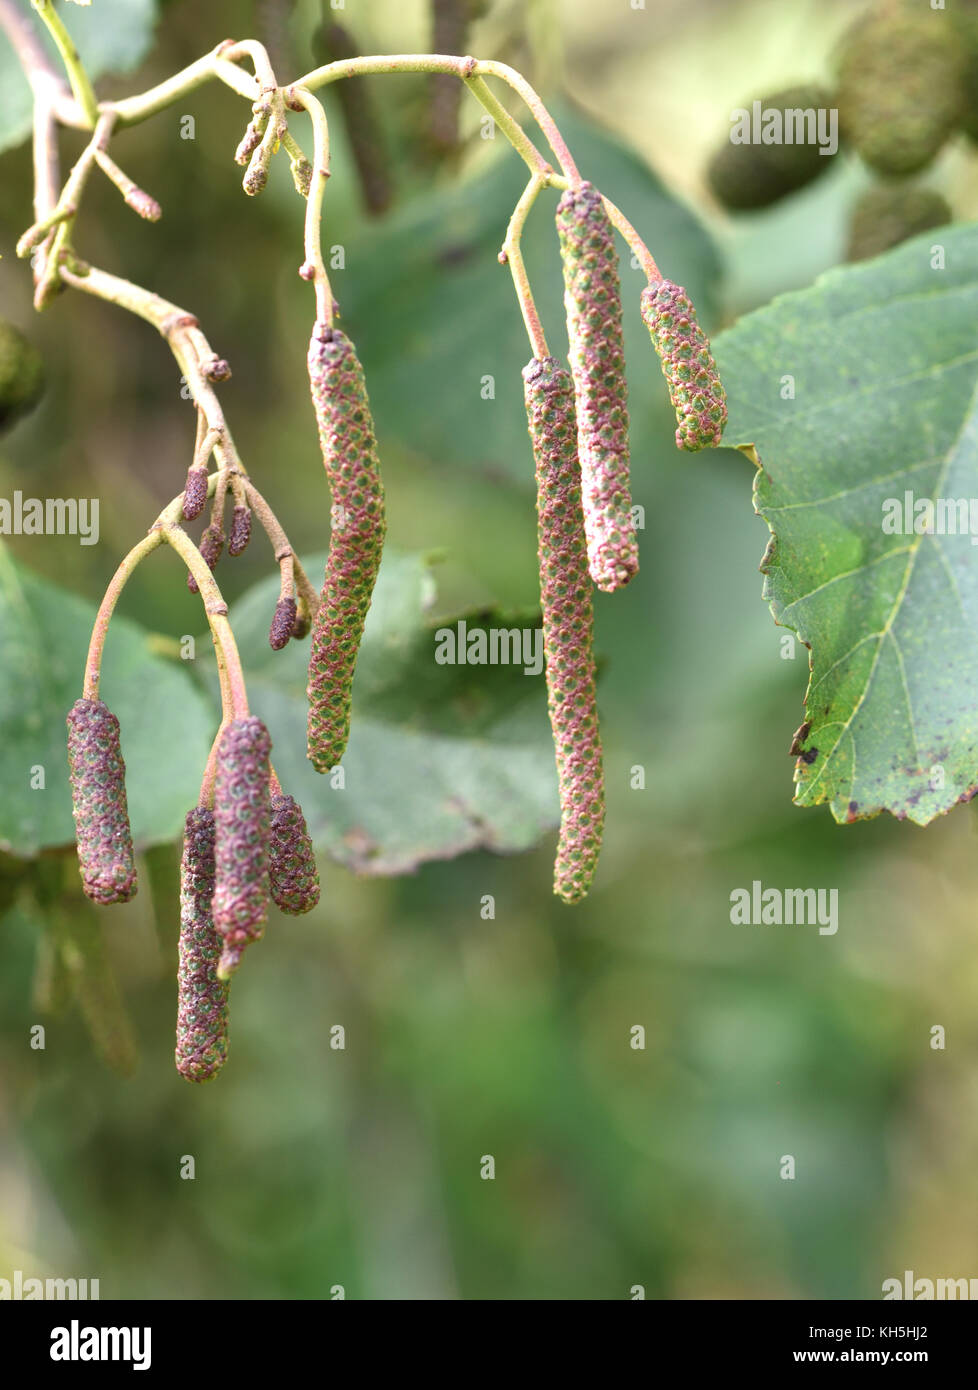 Male and female flowers, catkins, of alder (Alnus glutinosa) in autumn. They both appear on the same tree, monoecious, and open in spring. Bowling Gre Stock Photo